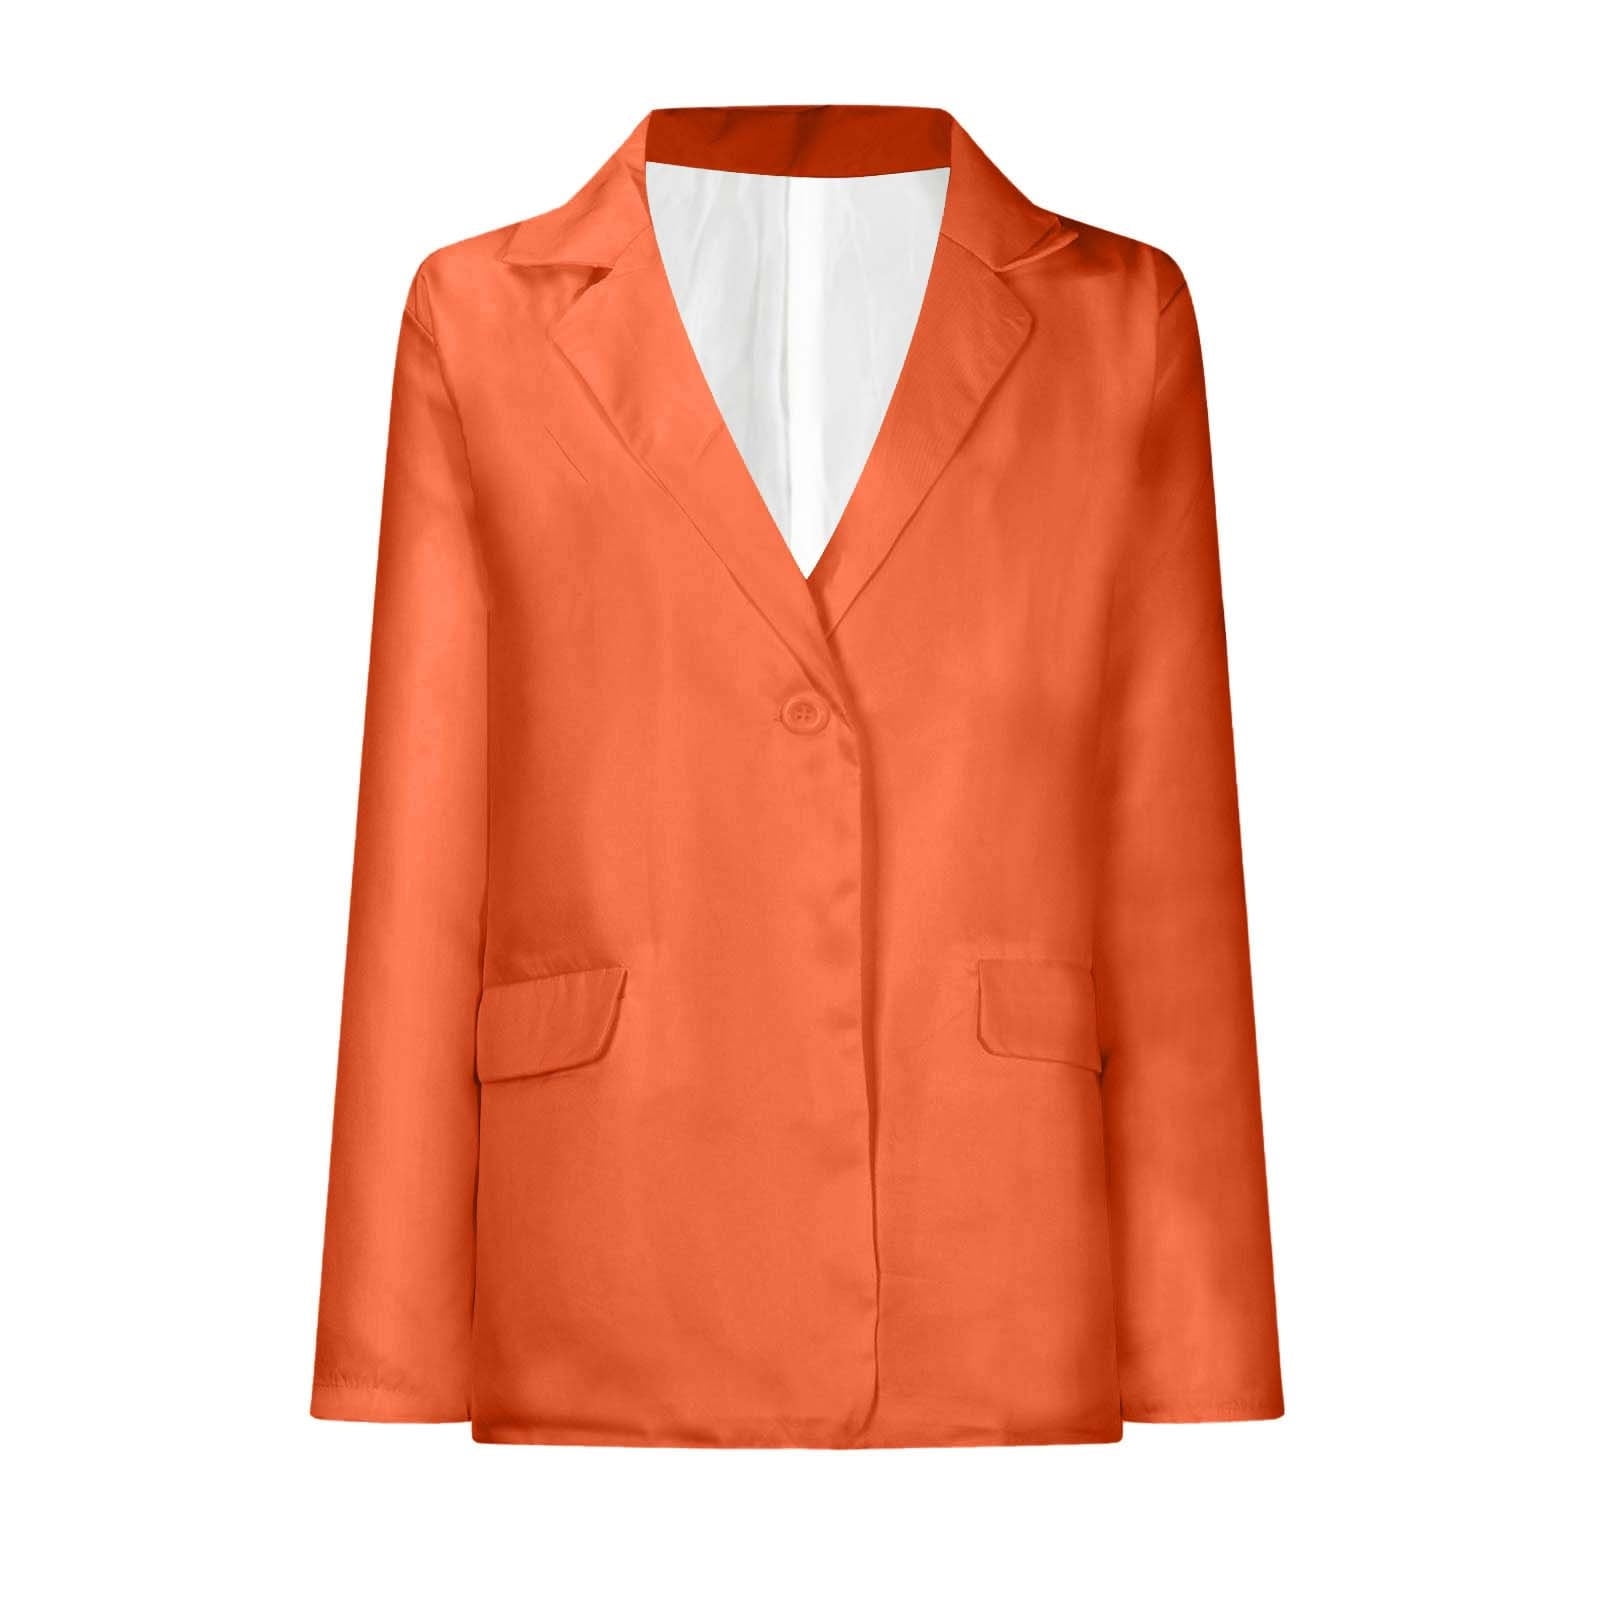 Deagia Woman's Jacket Classic-Fit Jacket for Casual Lightweight Blazer ...